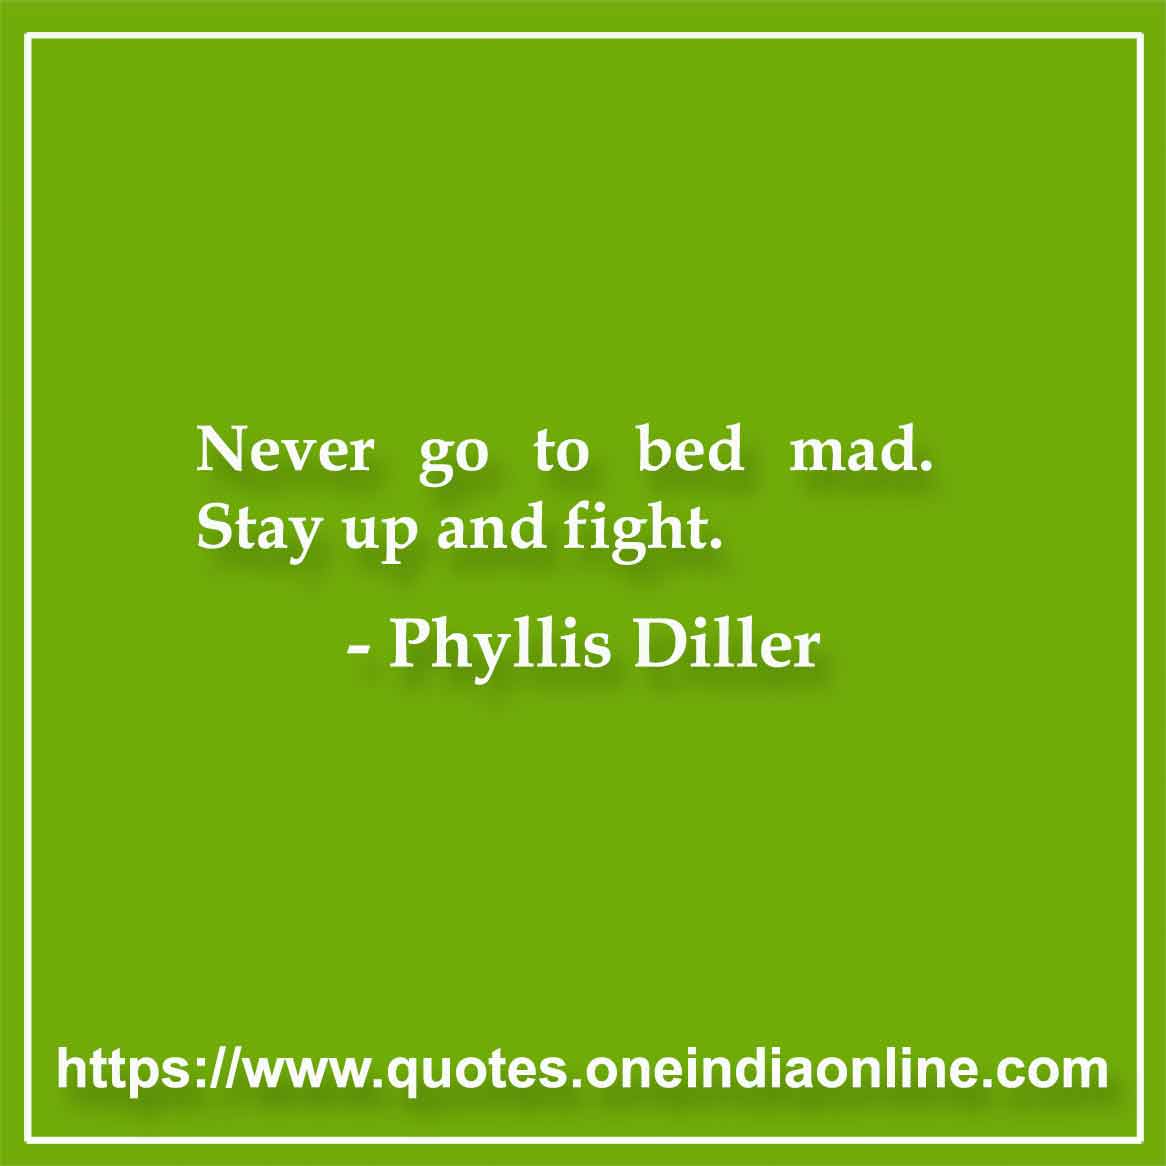 Never go to bed mad. Stay up and fight.

- Phyllis Diller